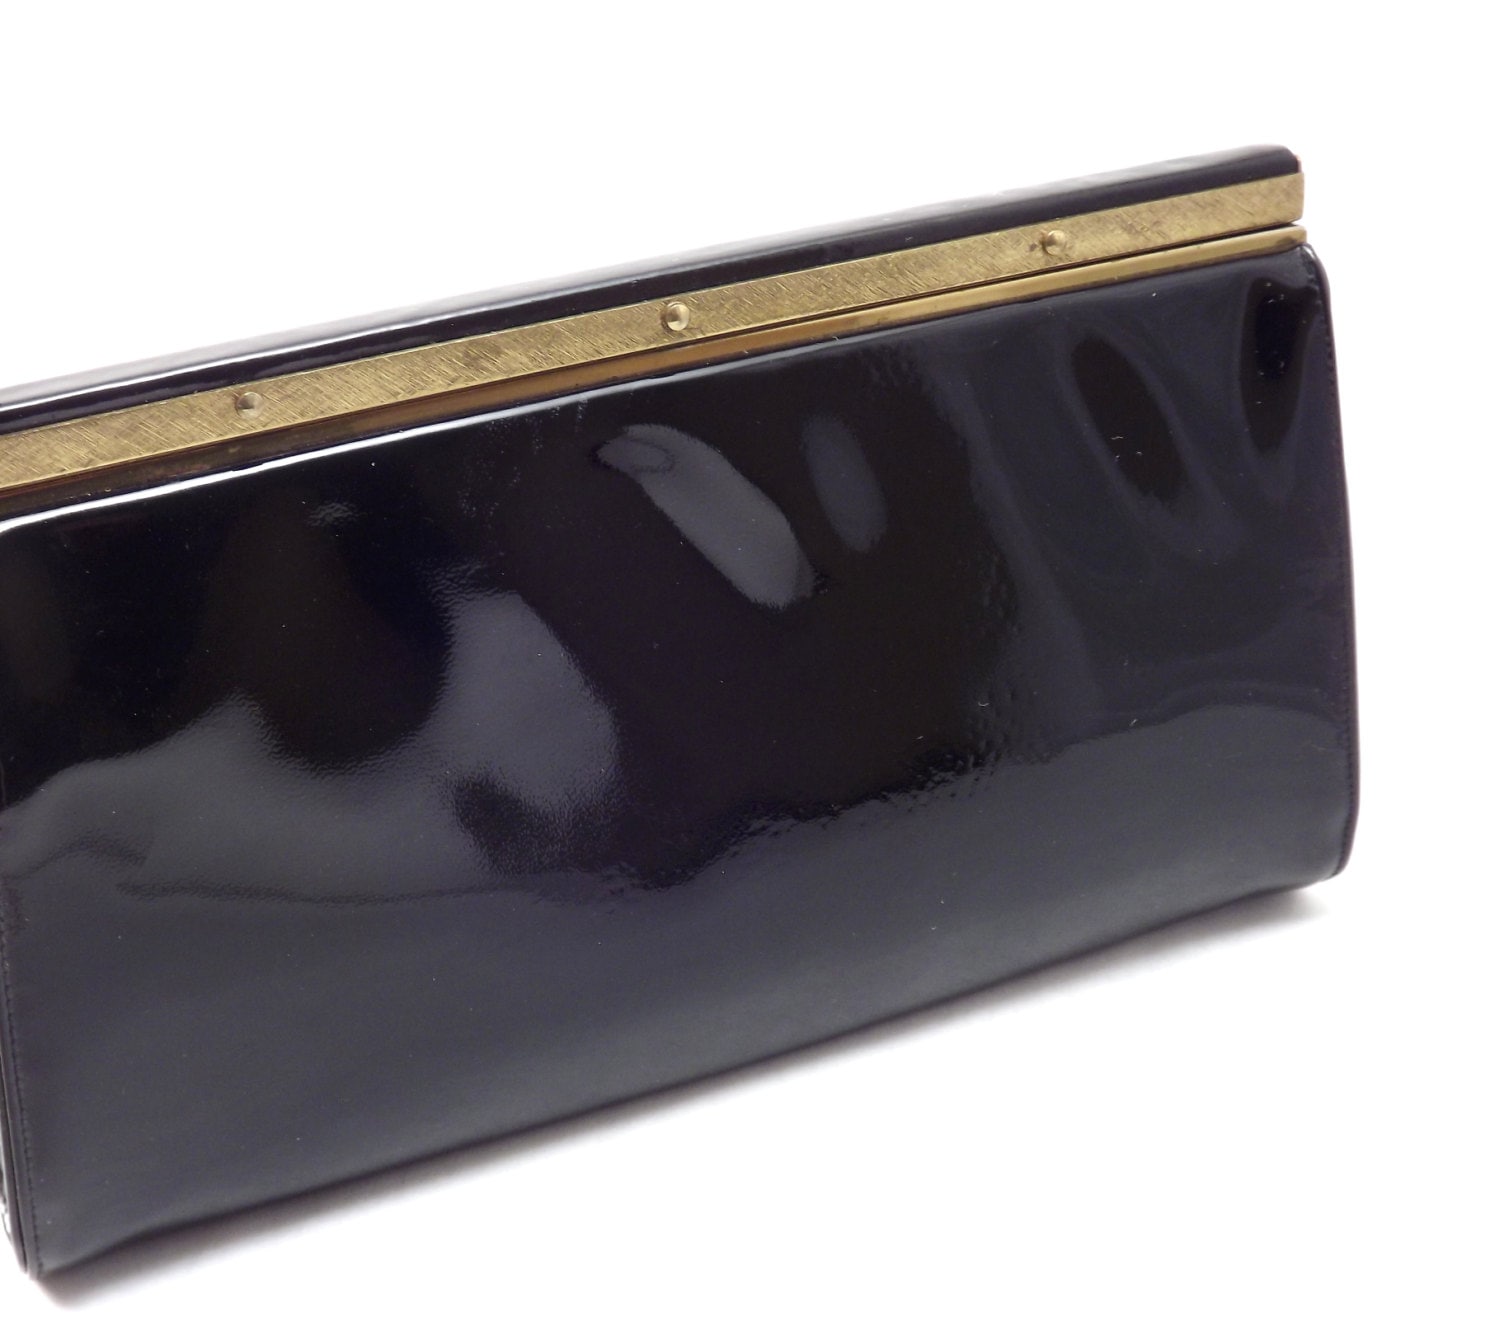 Black Evening Bag Patent Leather Clutch Purse by ForsythiaHill